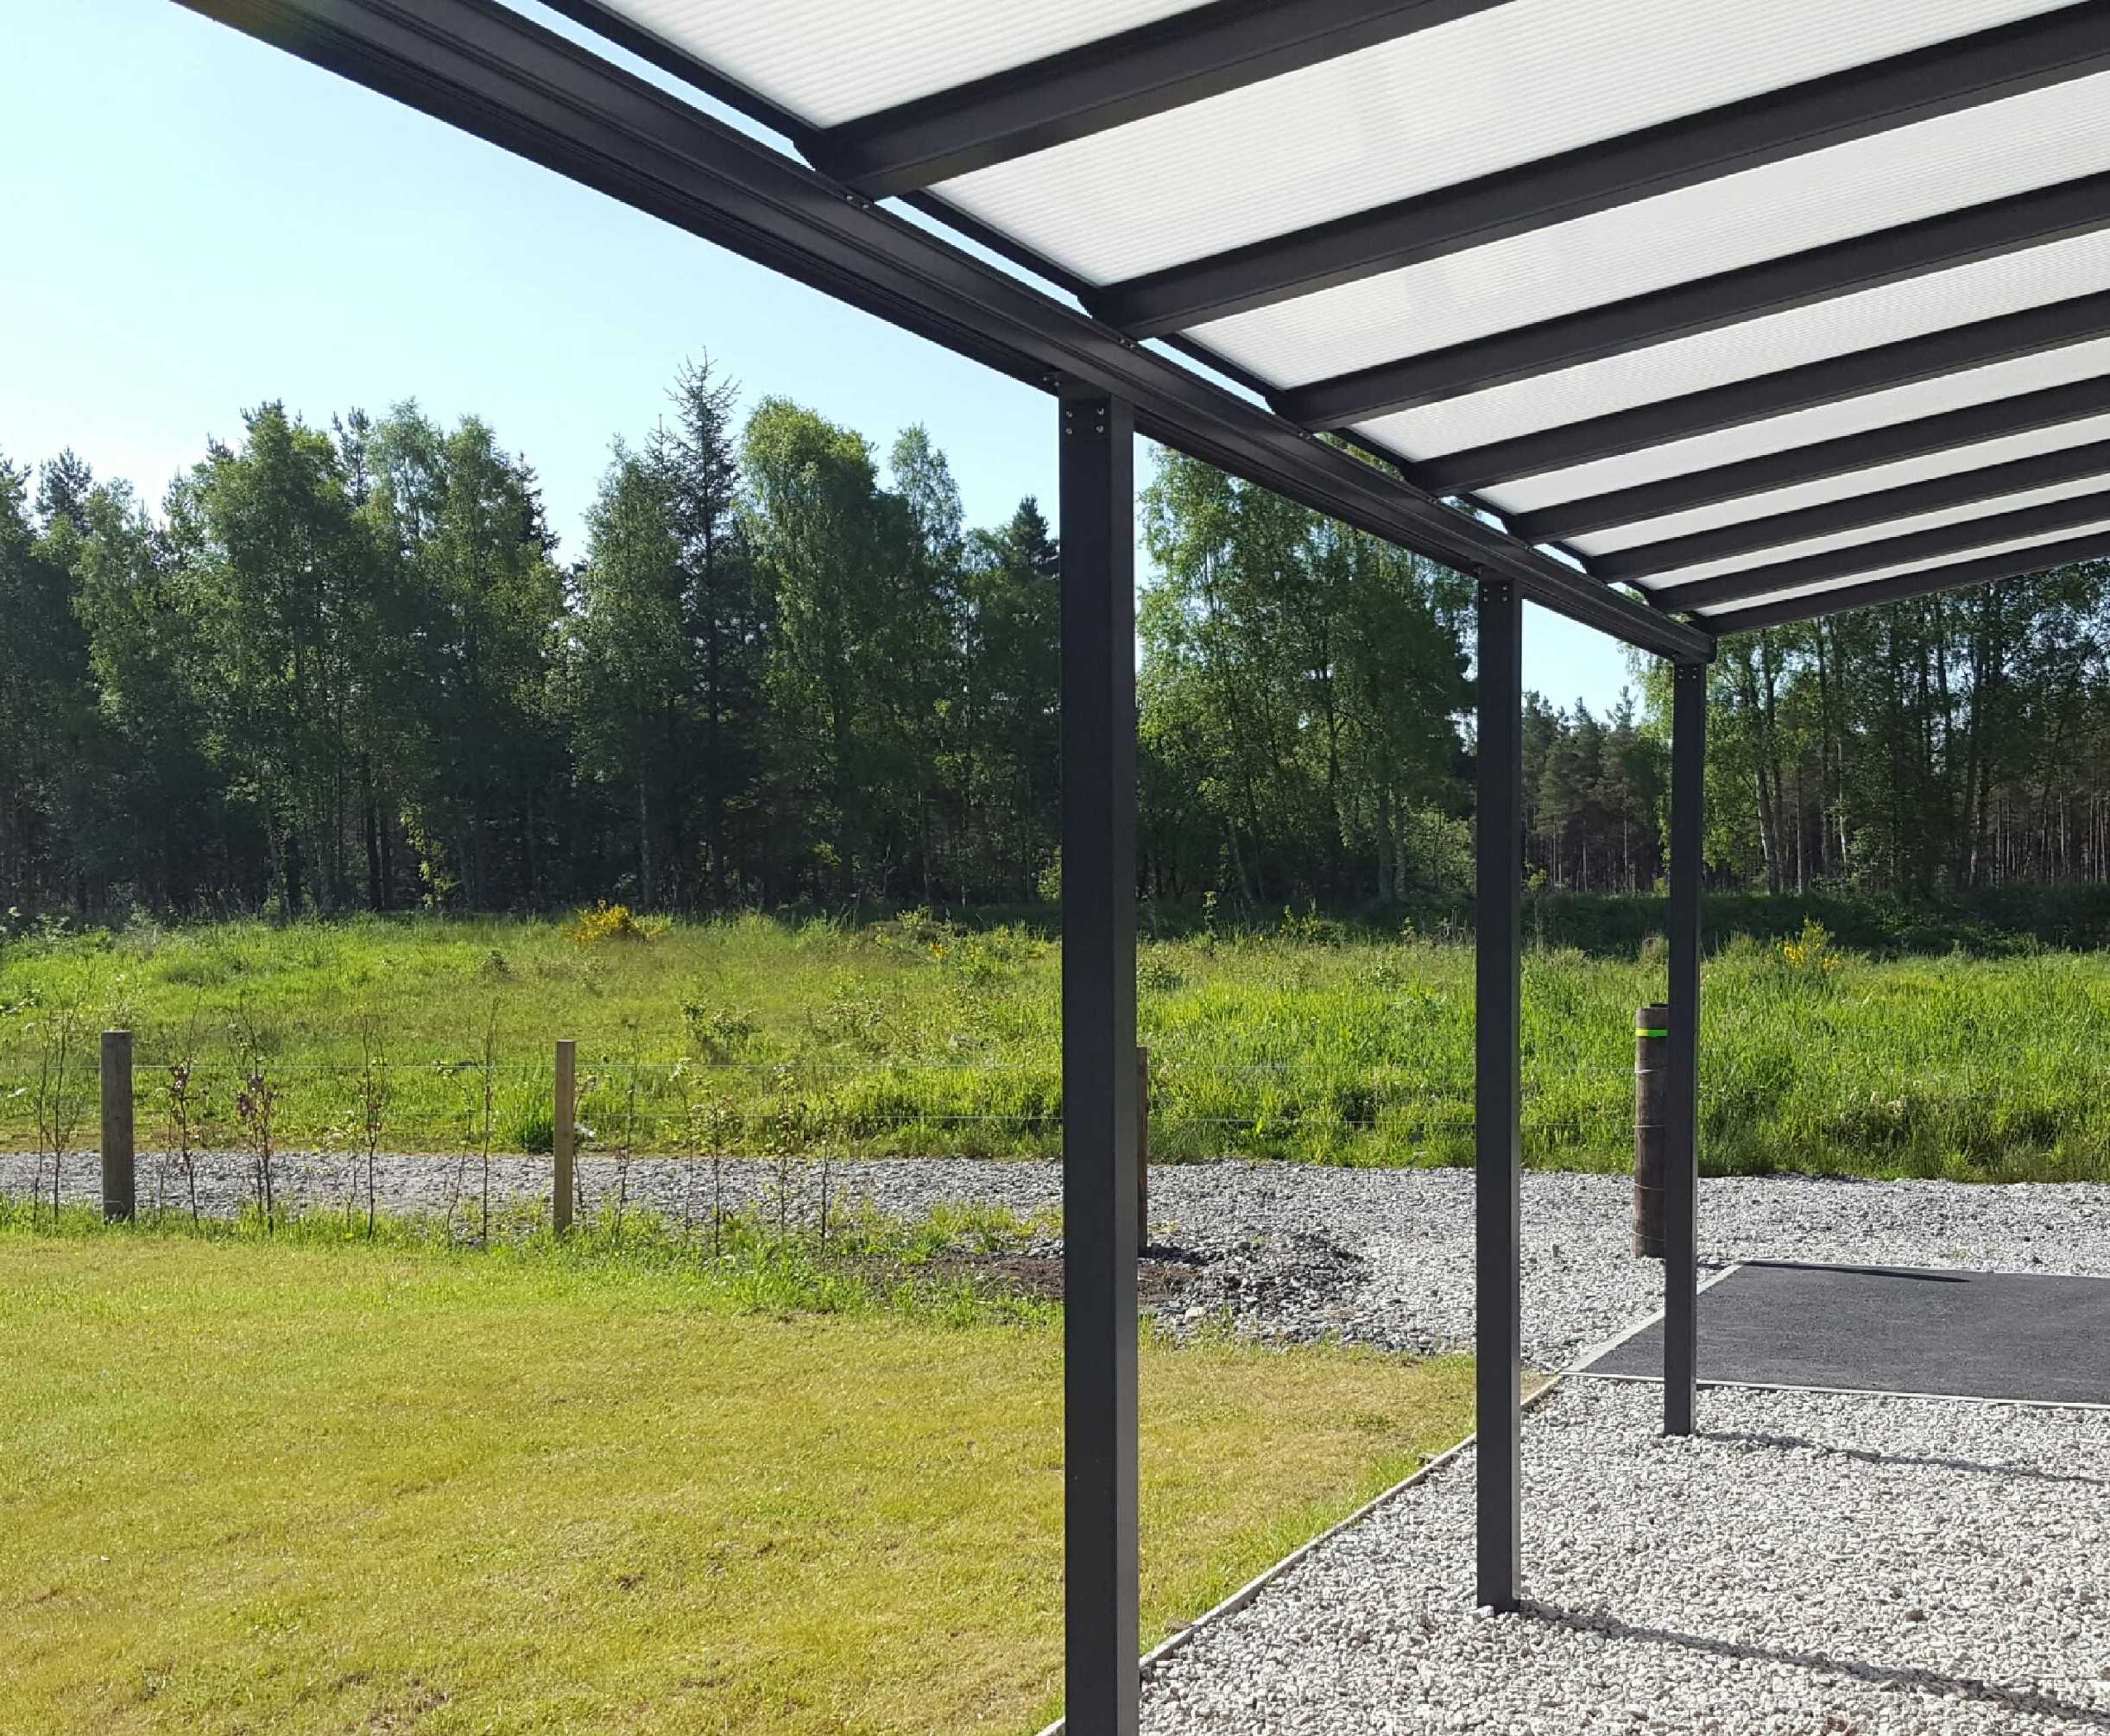 Omega Smart Lean-To Canopy, Anthracite Grey, 6mm Glass Clear Plate Polycarbonate Glazing - 7.0m (W) x 2.5m (P), (4) Supporting Posts